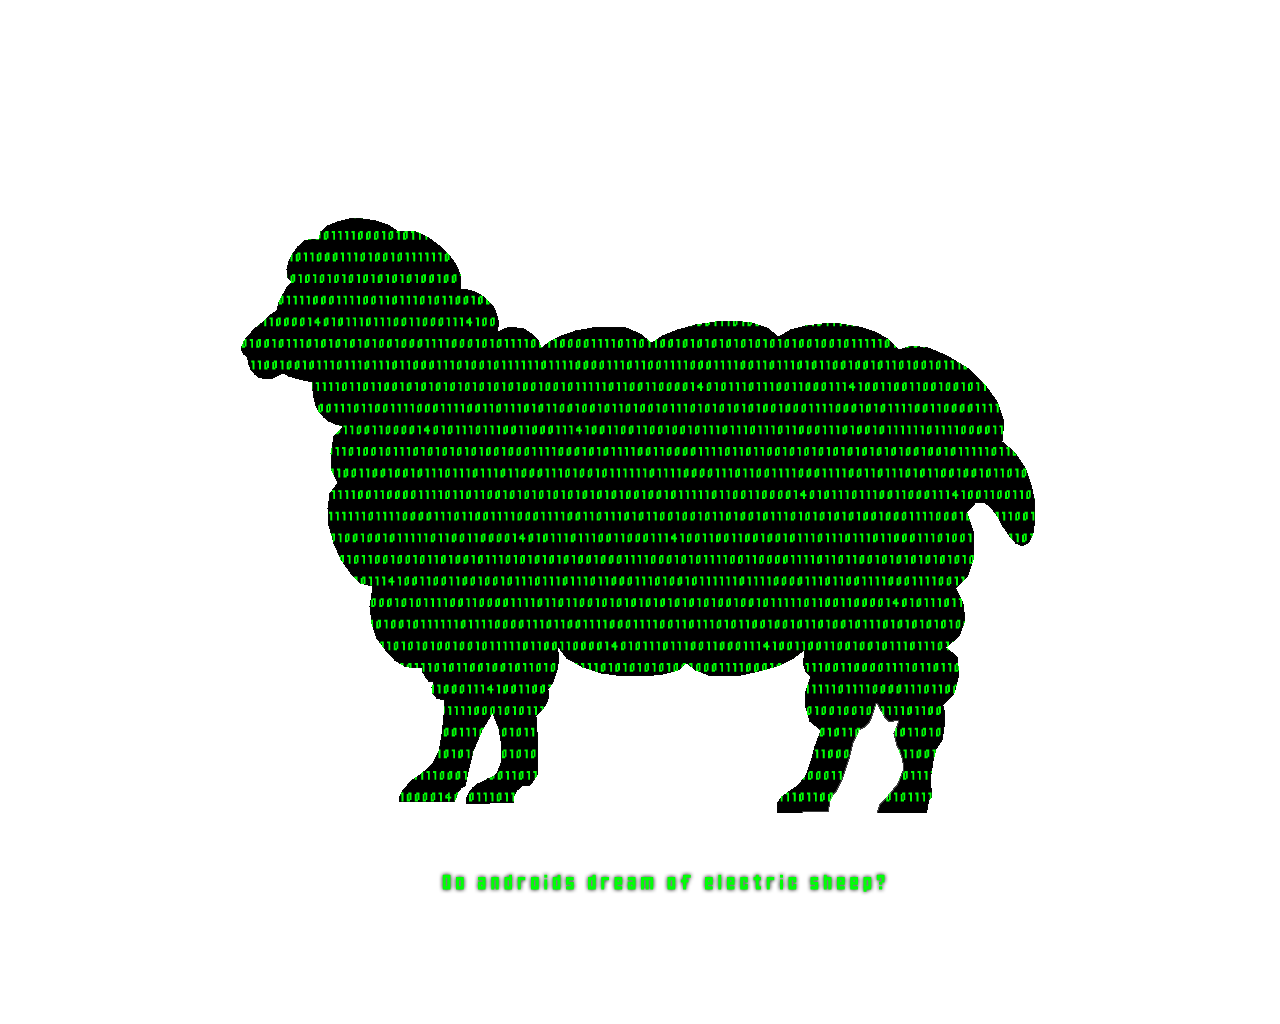 Electric Sheep by siravarice on